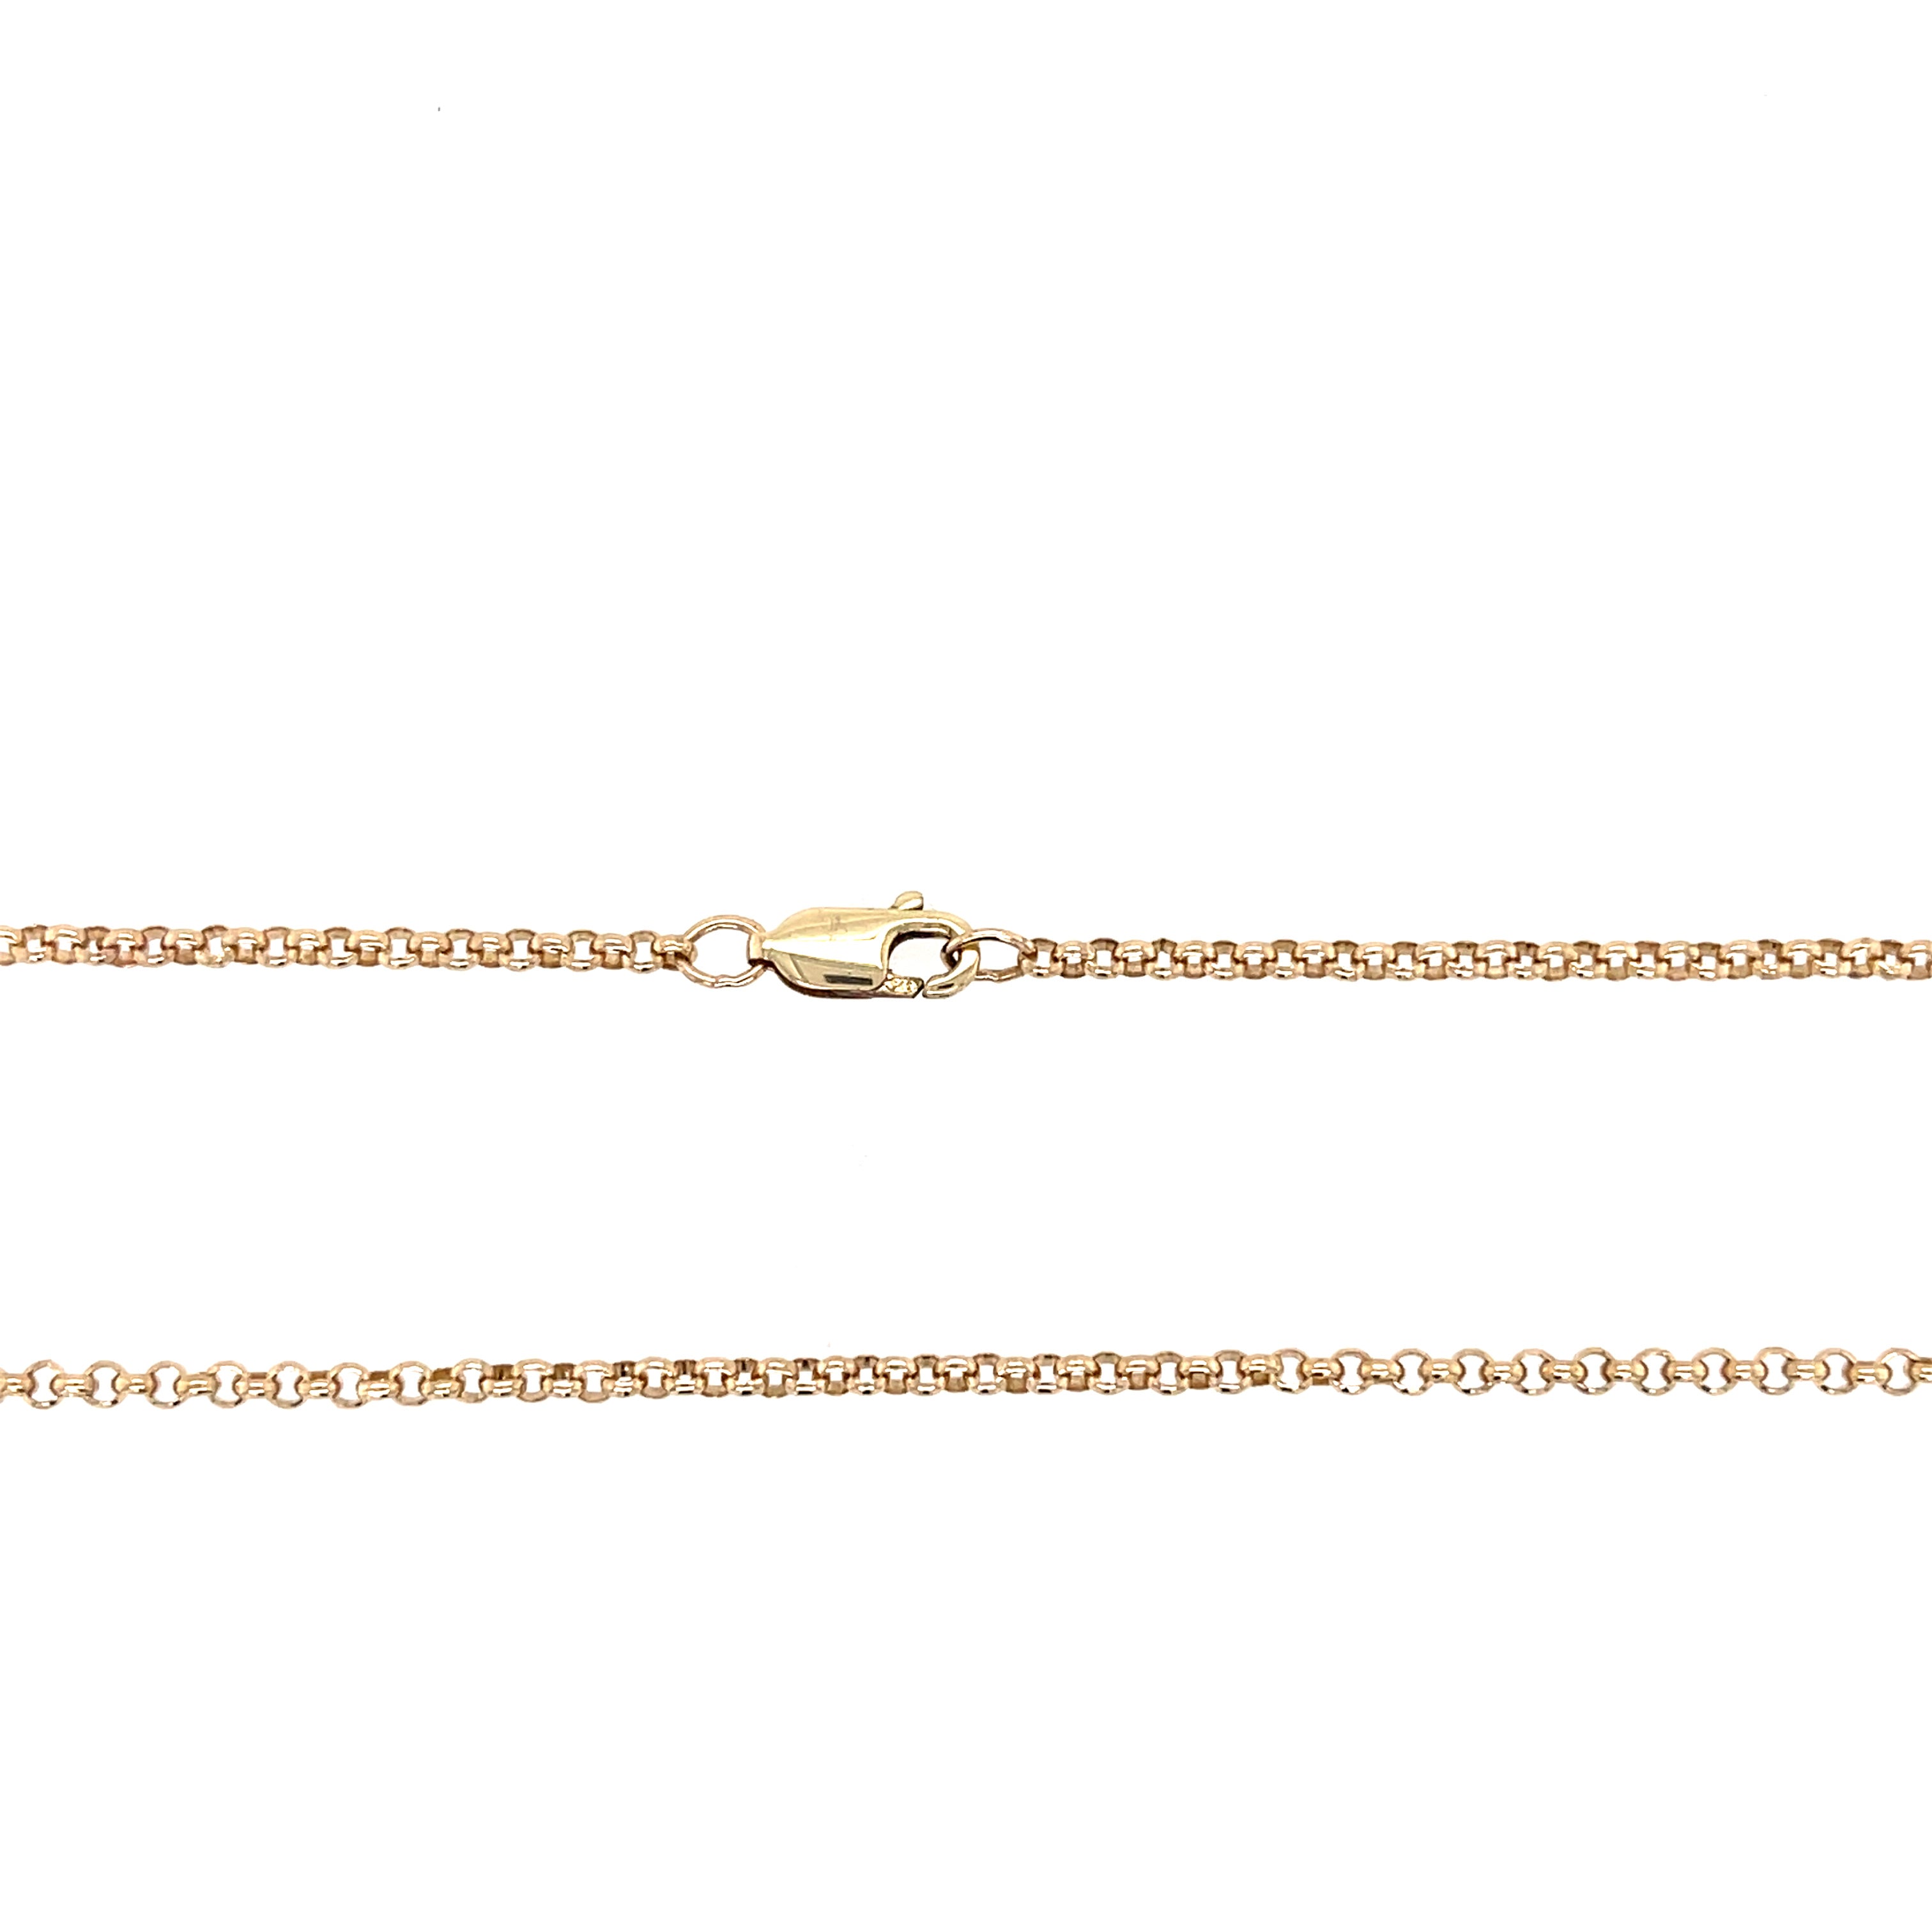 9ct Yellow Gold Round Link 20" Micro Belcher Chain - 5.80g SOLD